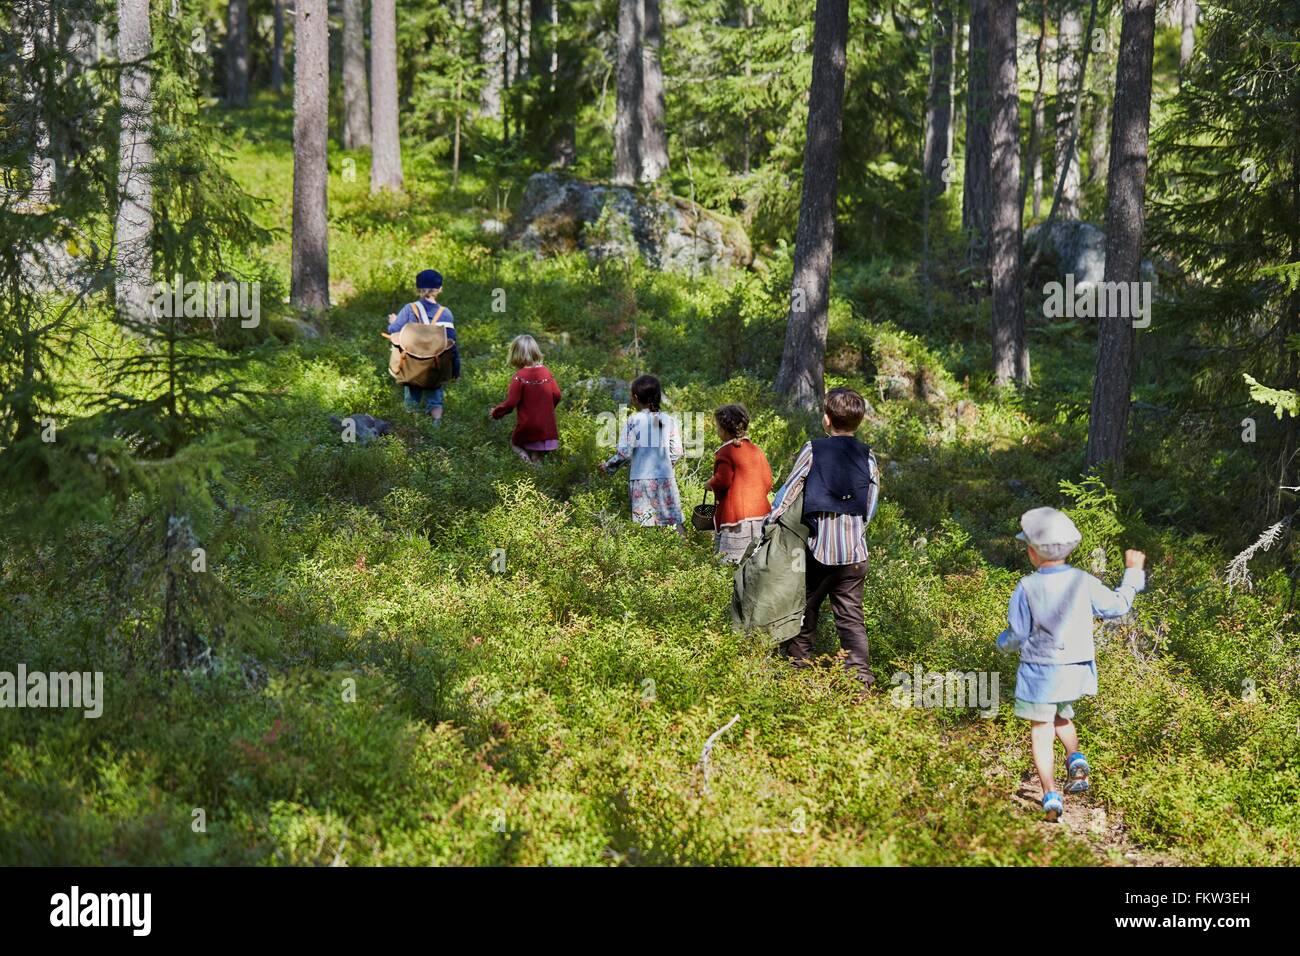 Six boys and girls dressed in retro clothing walking in forest Stock Photo